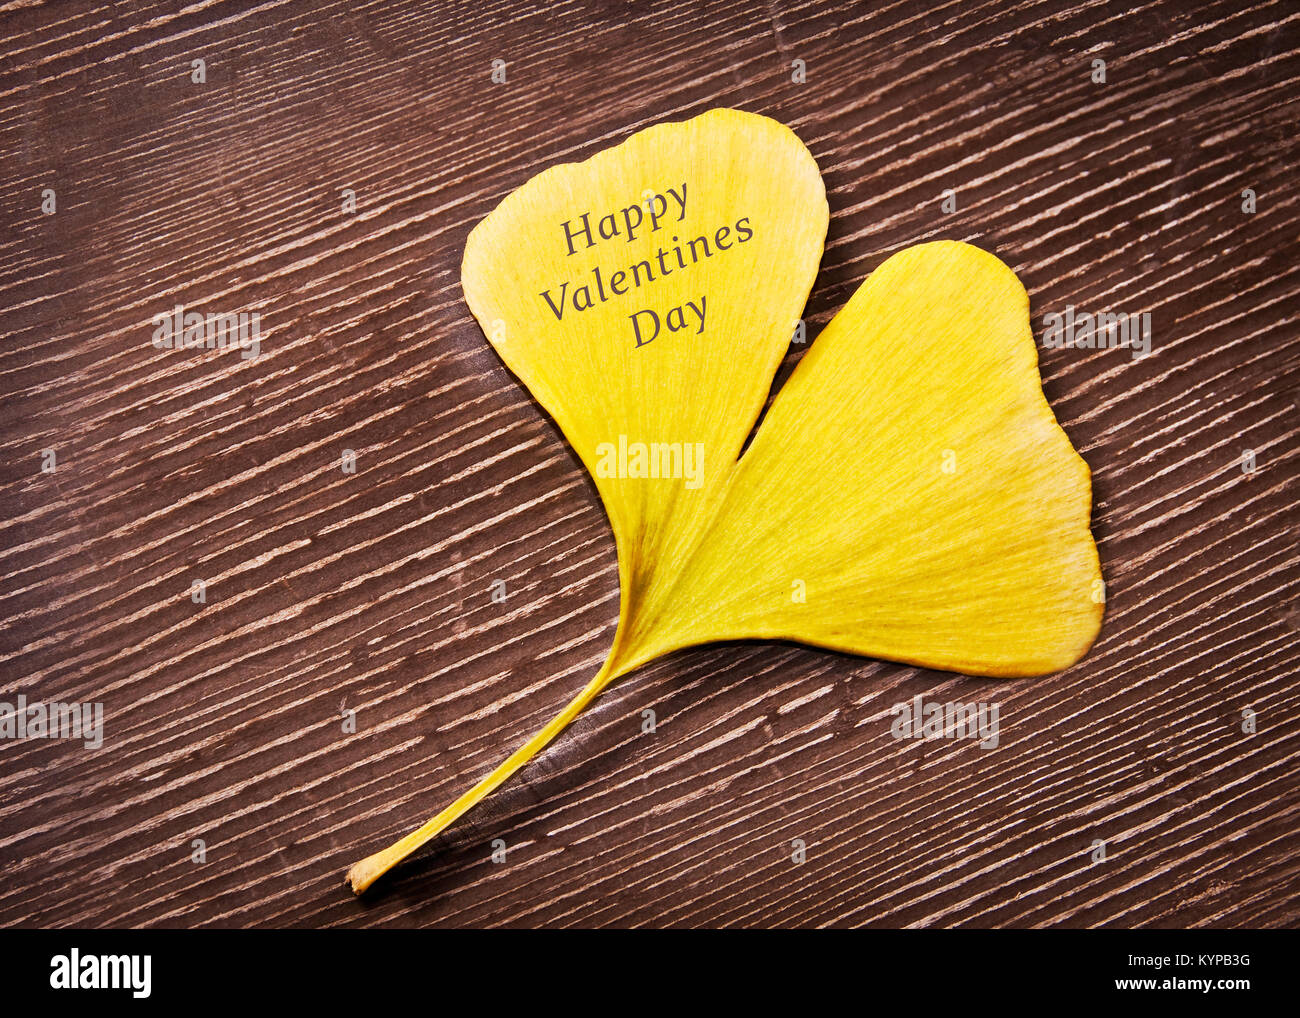 Happy Valentines day written on a heart shaped yellow ginkgo biloba leaf Stock Photo